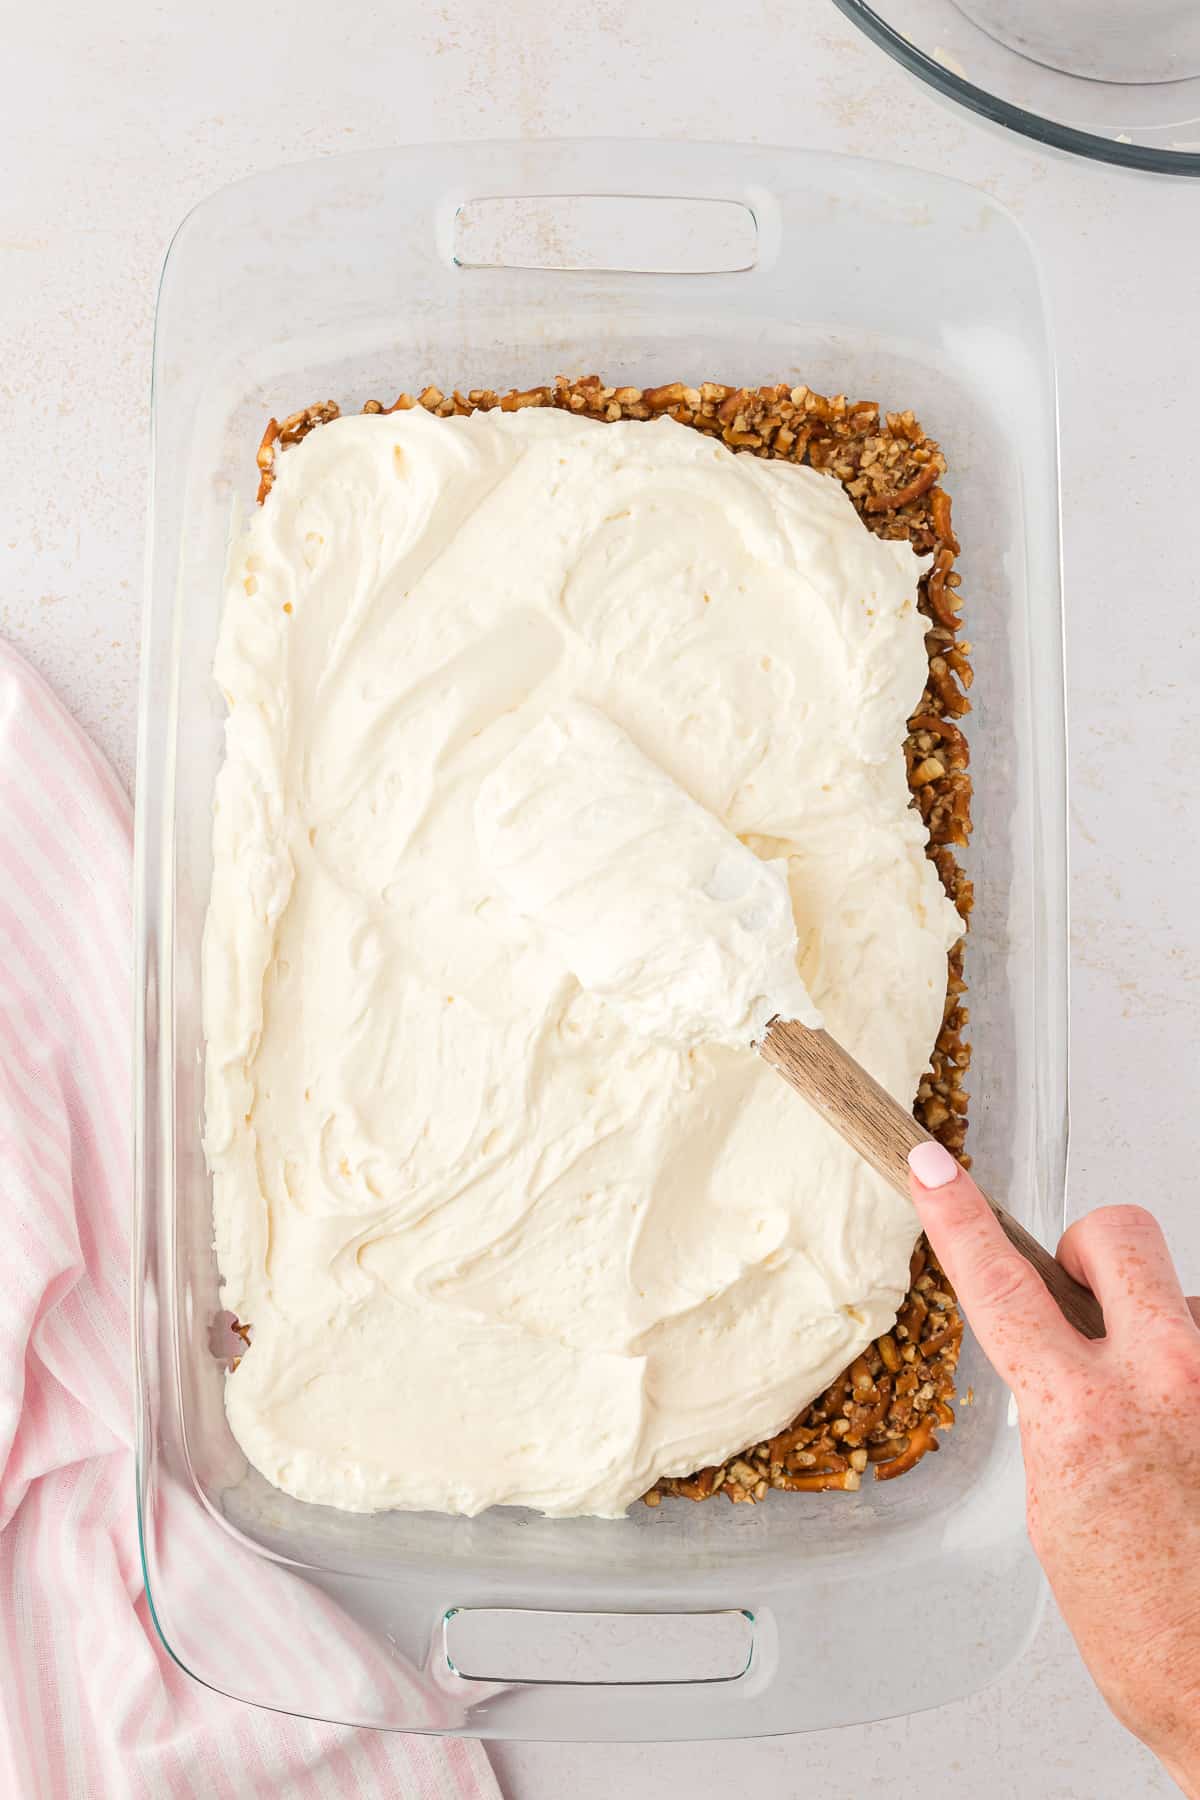 the cream cheese layer of strawberry pretzel salad being spread over top of the pretzel crust layer in a large glass baking dish, beside a pink and white kitchen towel